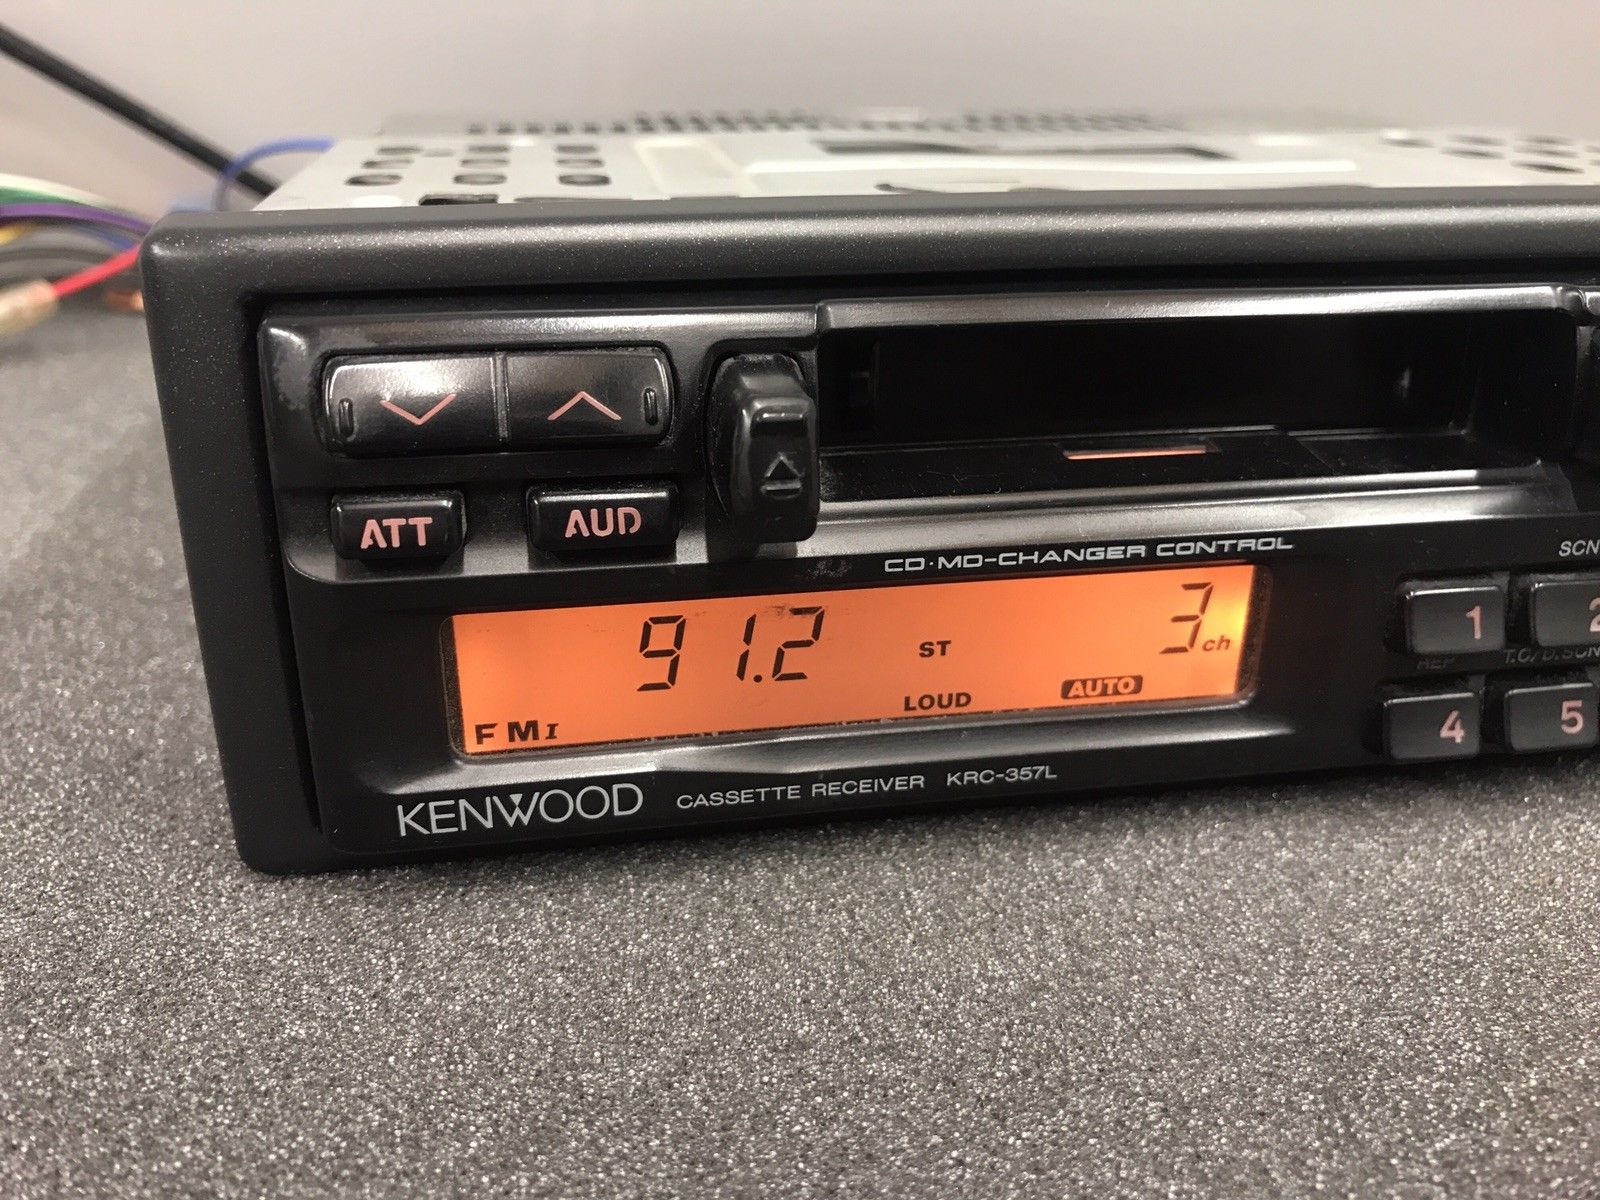 Old Classic Kenwood Car Radio Stereo Cassette Player Model Krc-357L Cd Control